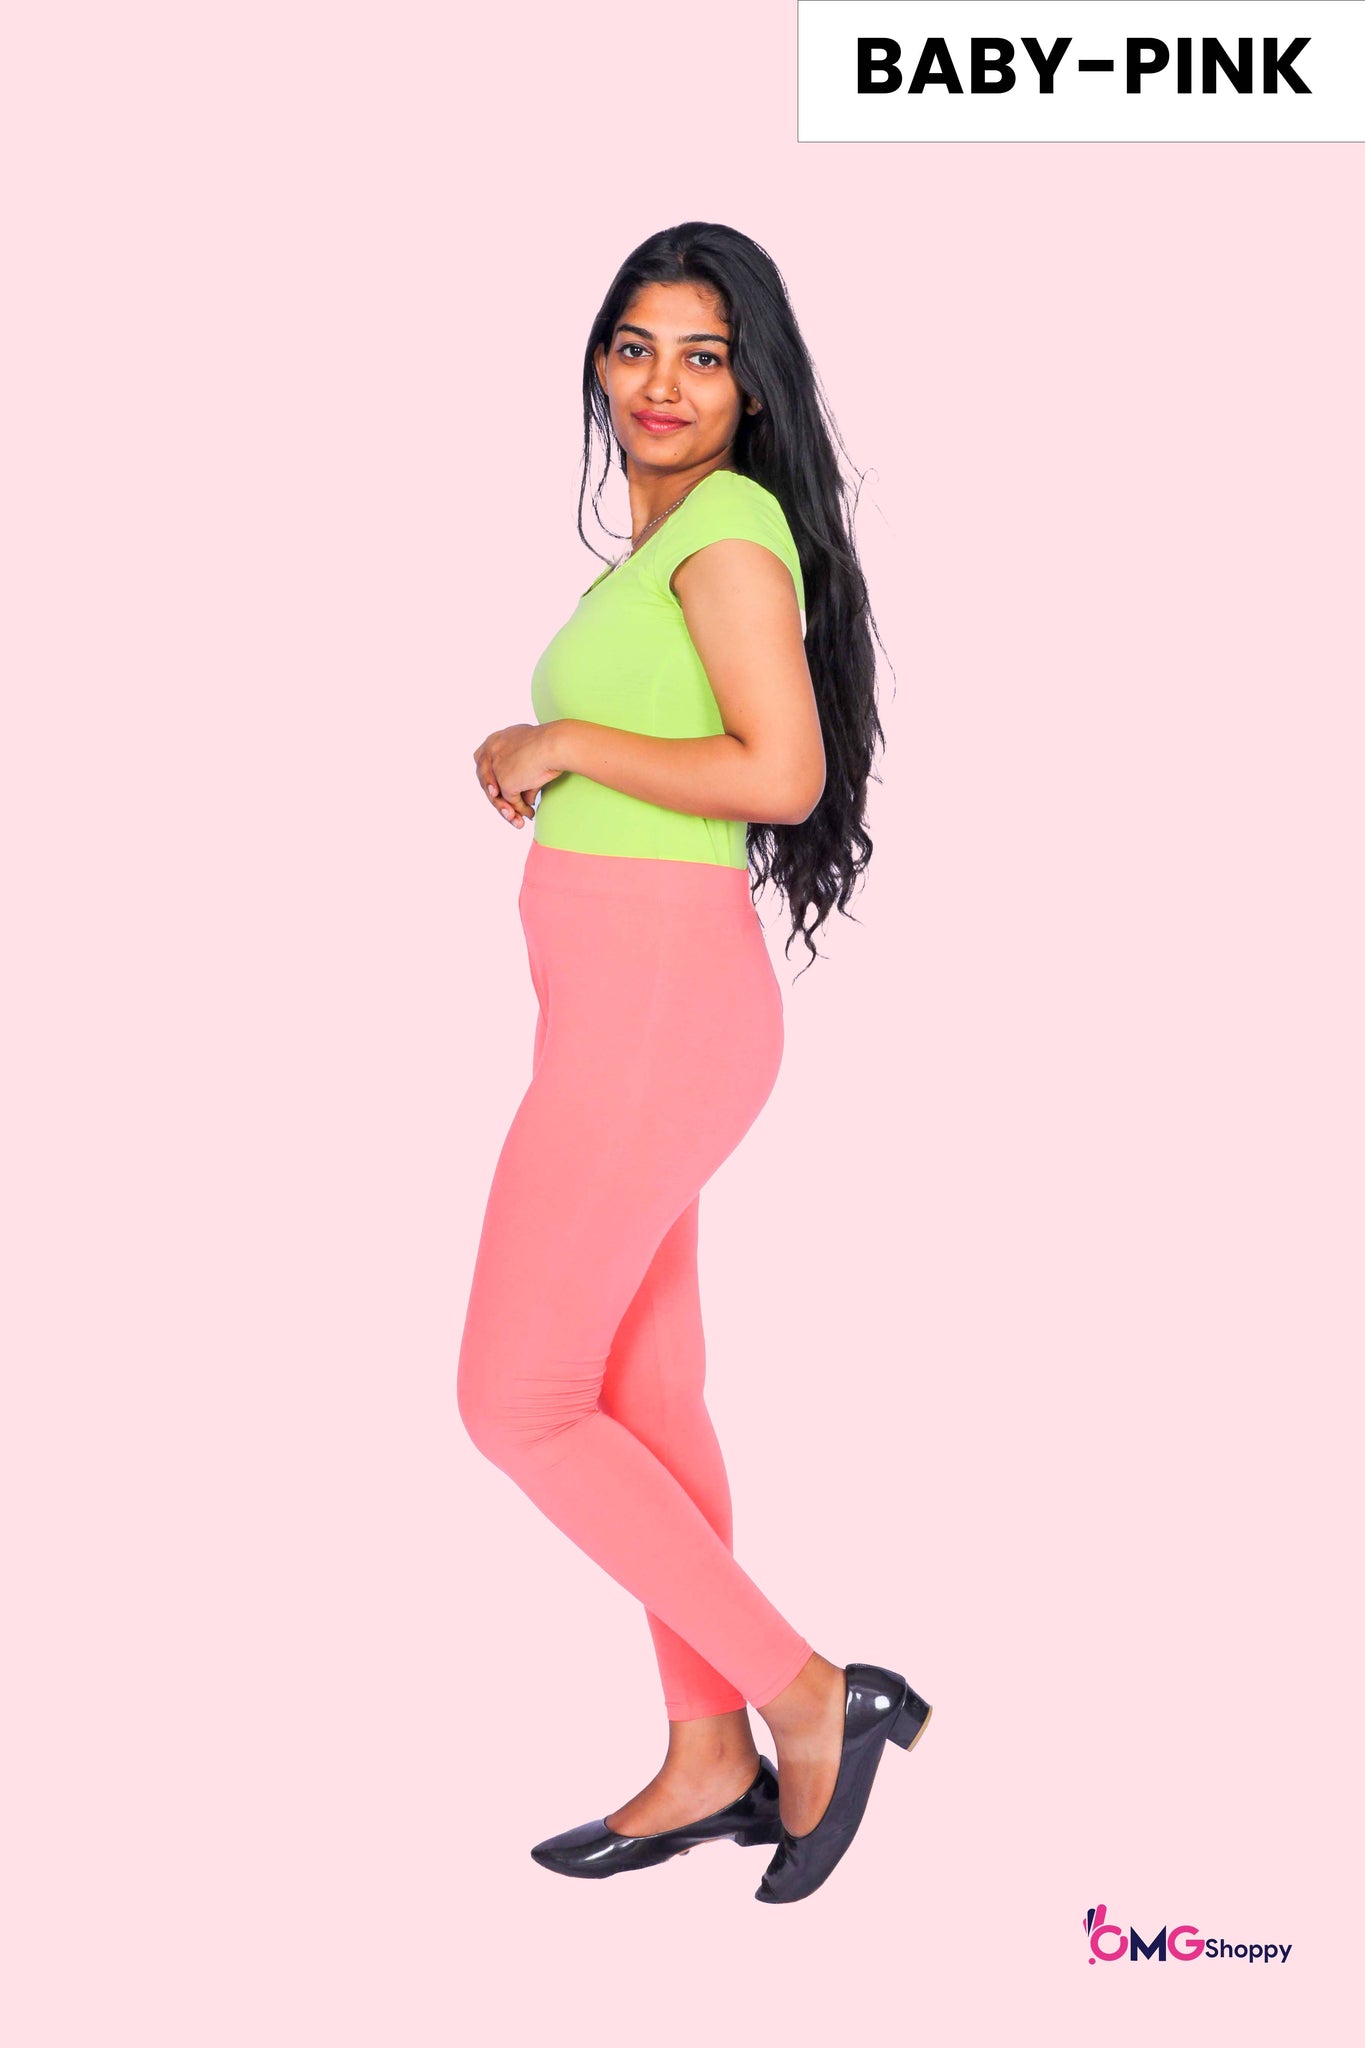 Red Mid Waist 4 Way Viscose Ankle Legging, Casual Wear, Skin Fit at best  price in Ahmedabad